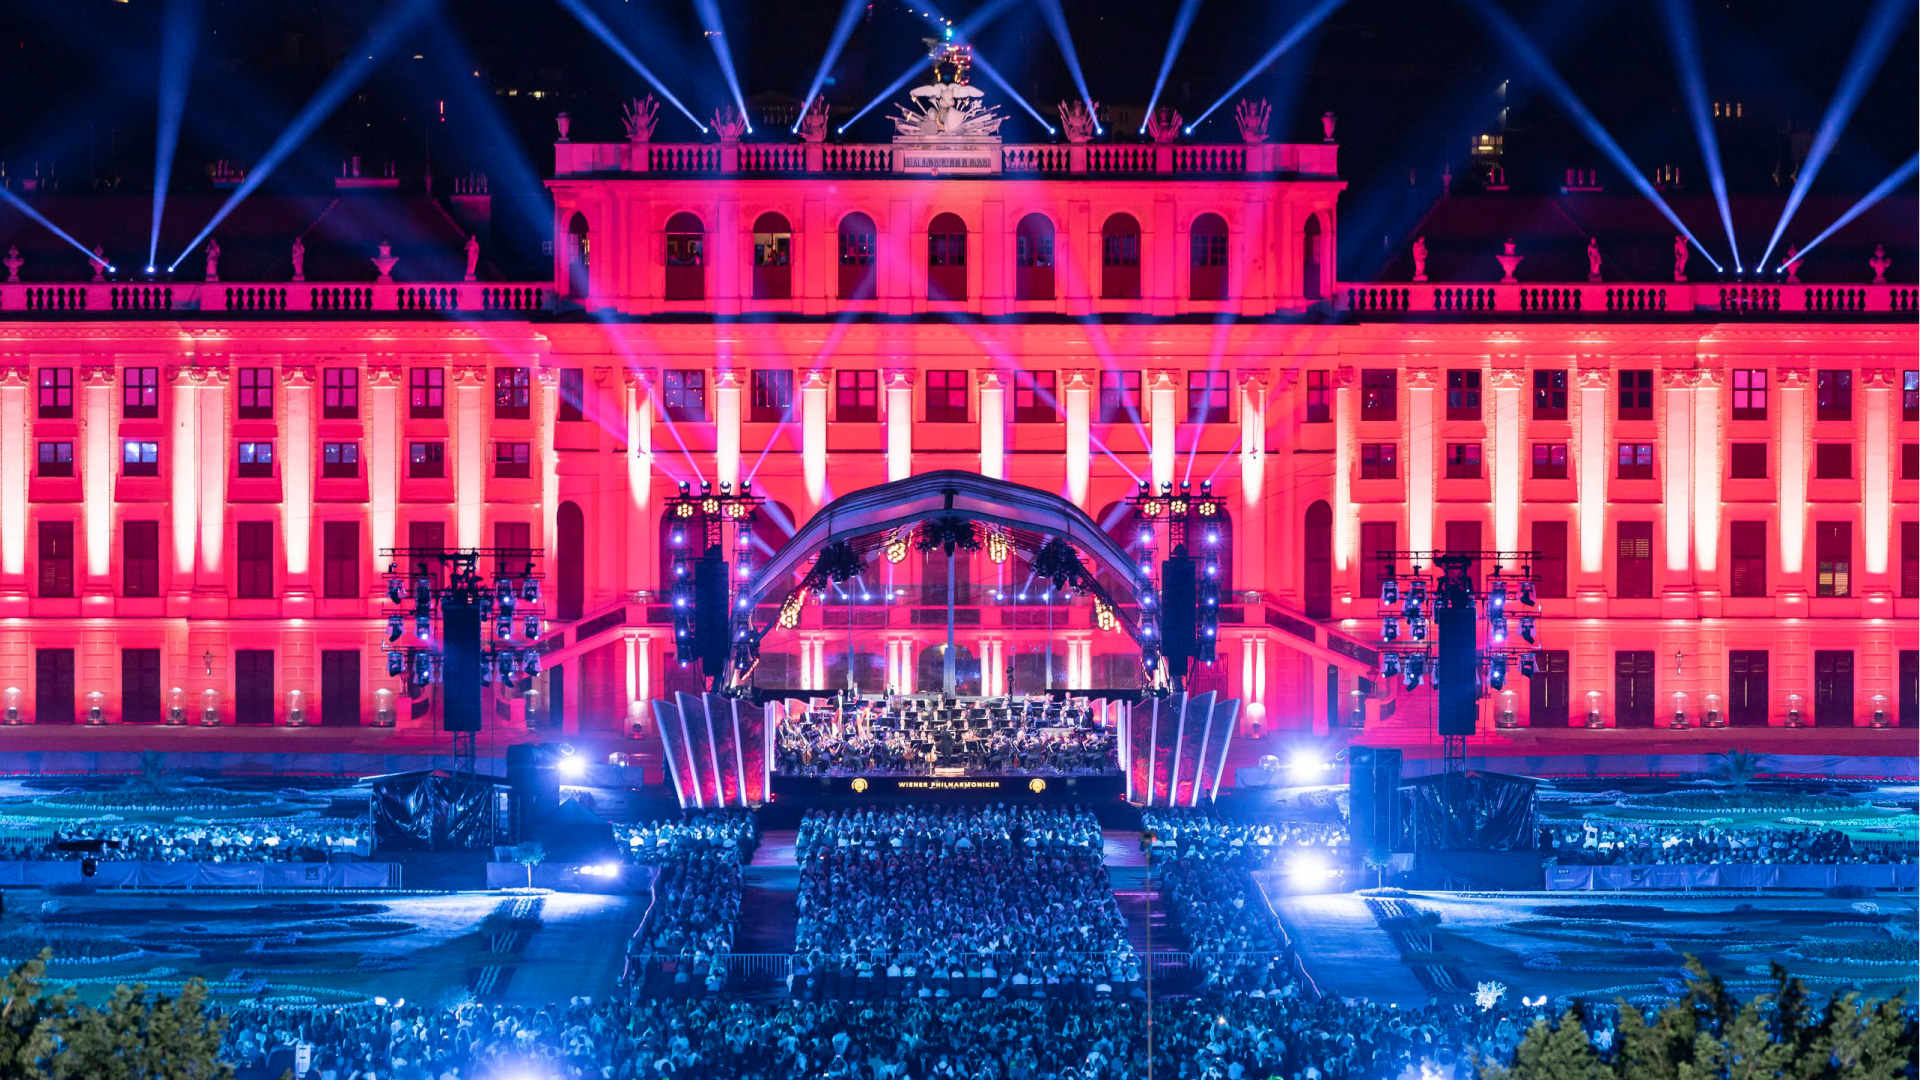 Summer night concert at Schönbrunn Palace in Vienna. PRG supplied rigging, lighting technology, video technology, technical implementation planning, personnel services for realization and support and material logistics.